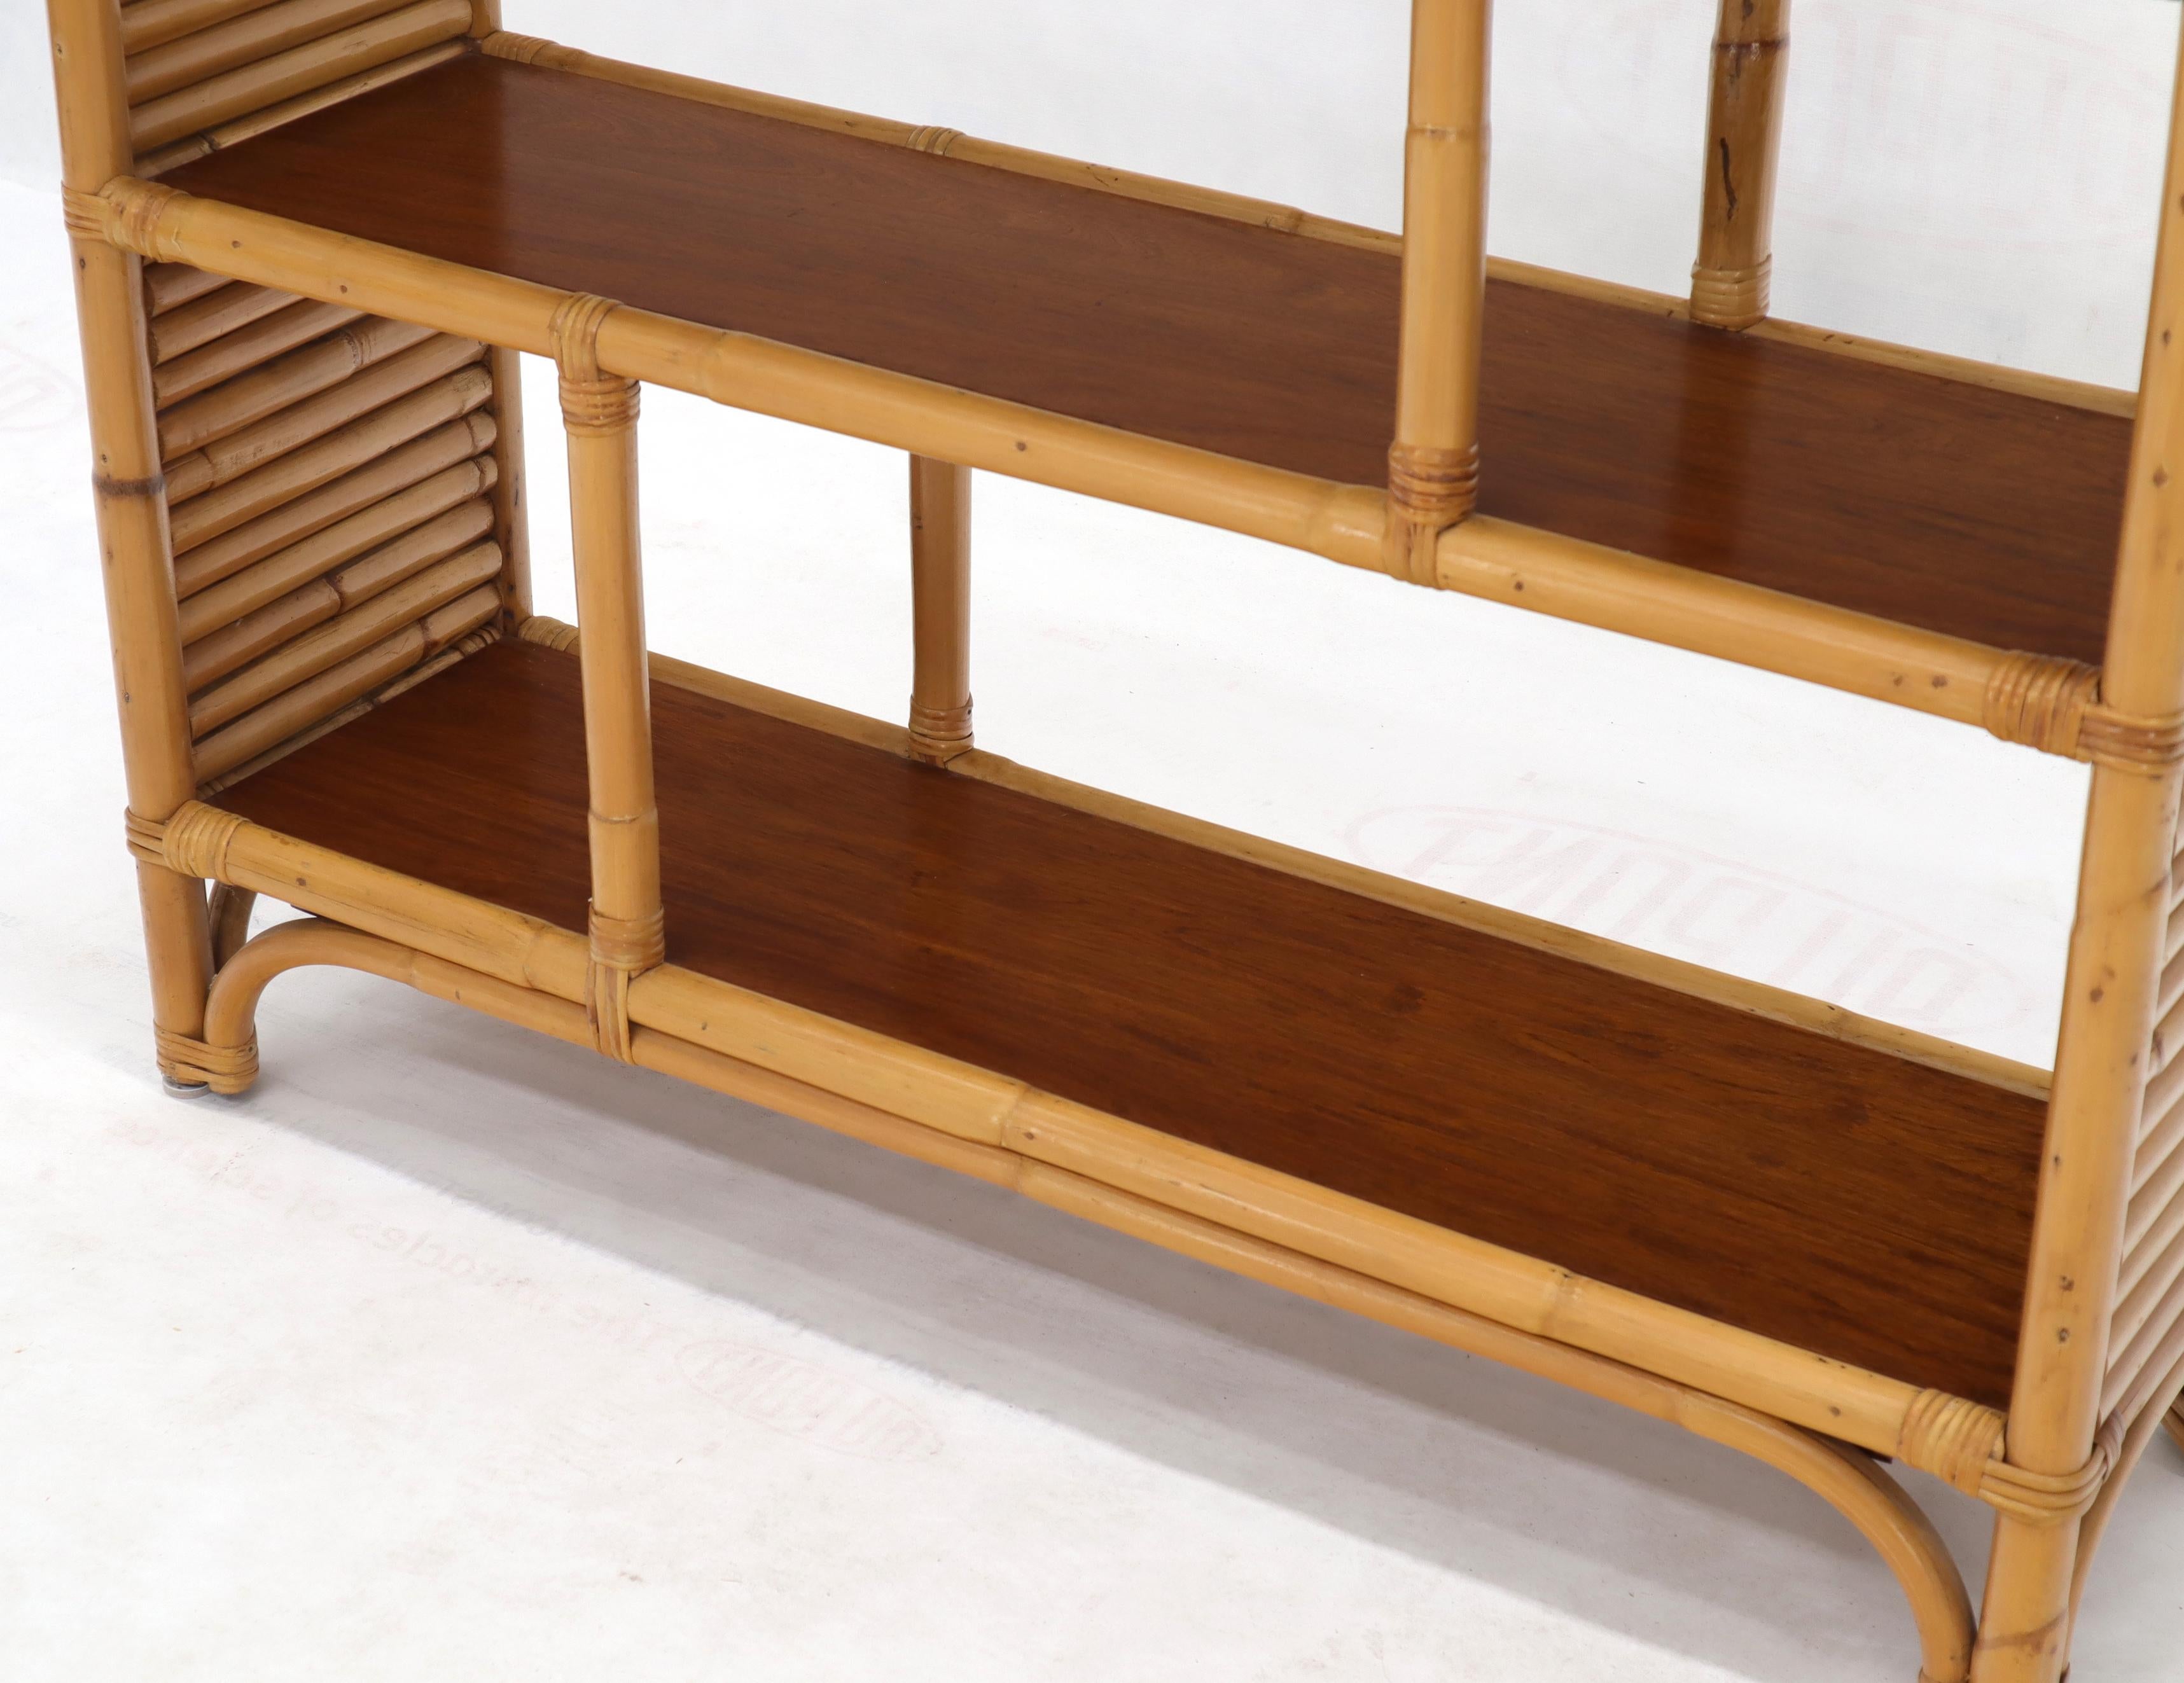 Lacquered Rattan and Walnut Mid-Century Modern Console Table Shelf Bookcase